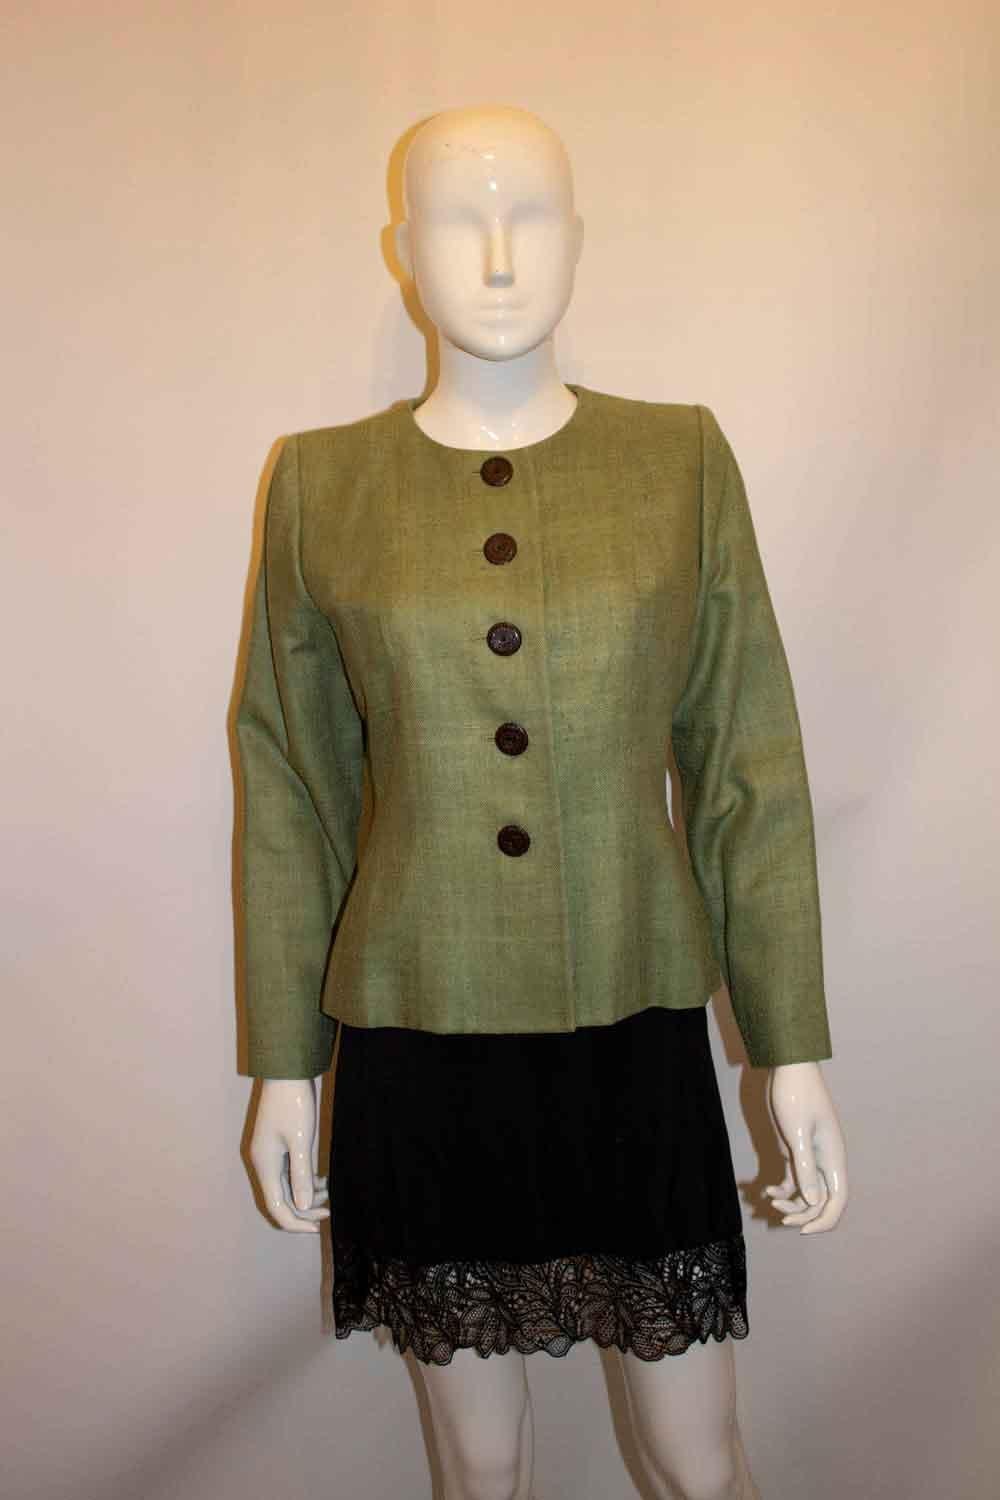 Yves Saint Laurent Rive Gauche Raw Silk Jacket In Good Condition For Sale In London, GB